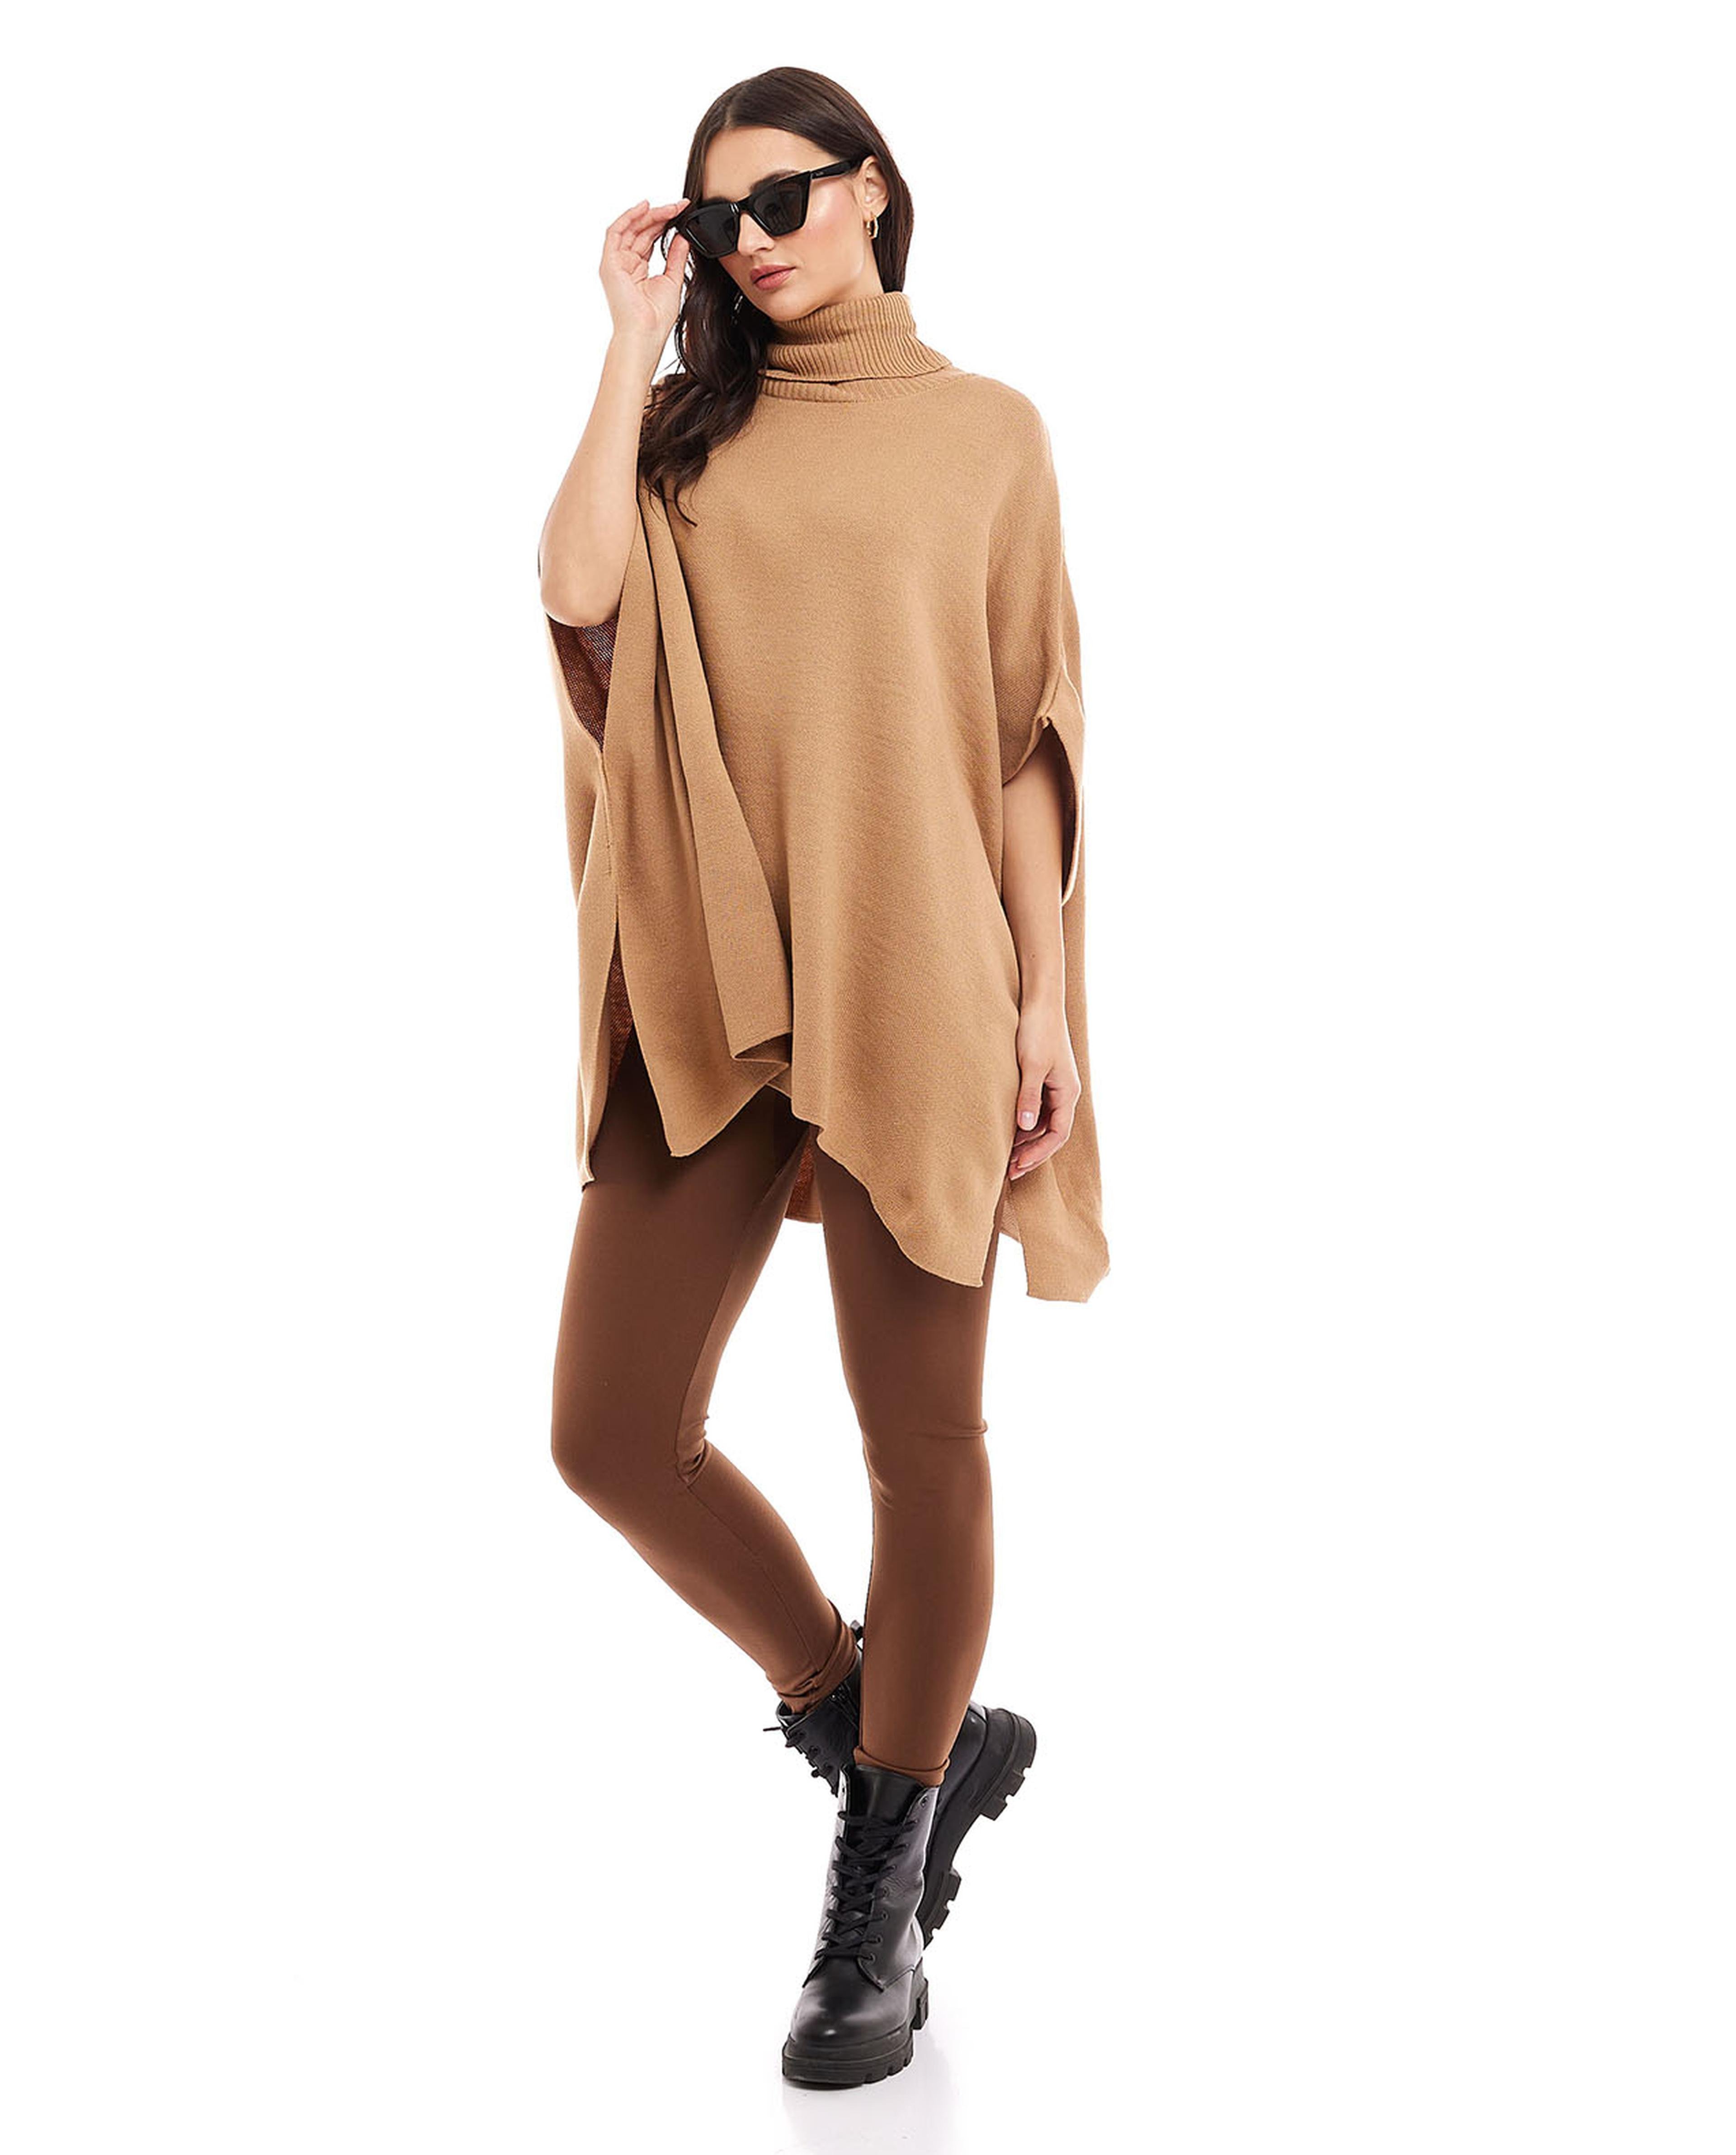 Poncho Sweater with Turtleneck and 3/4 Sleeves